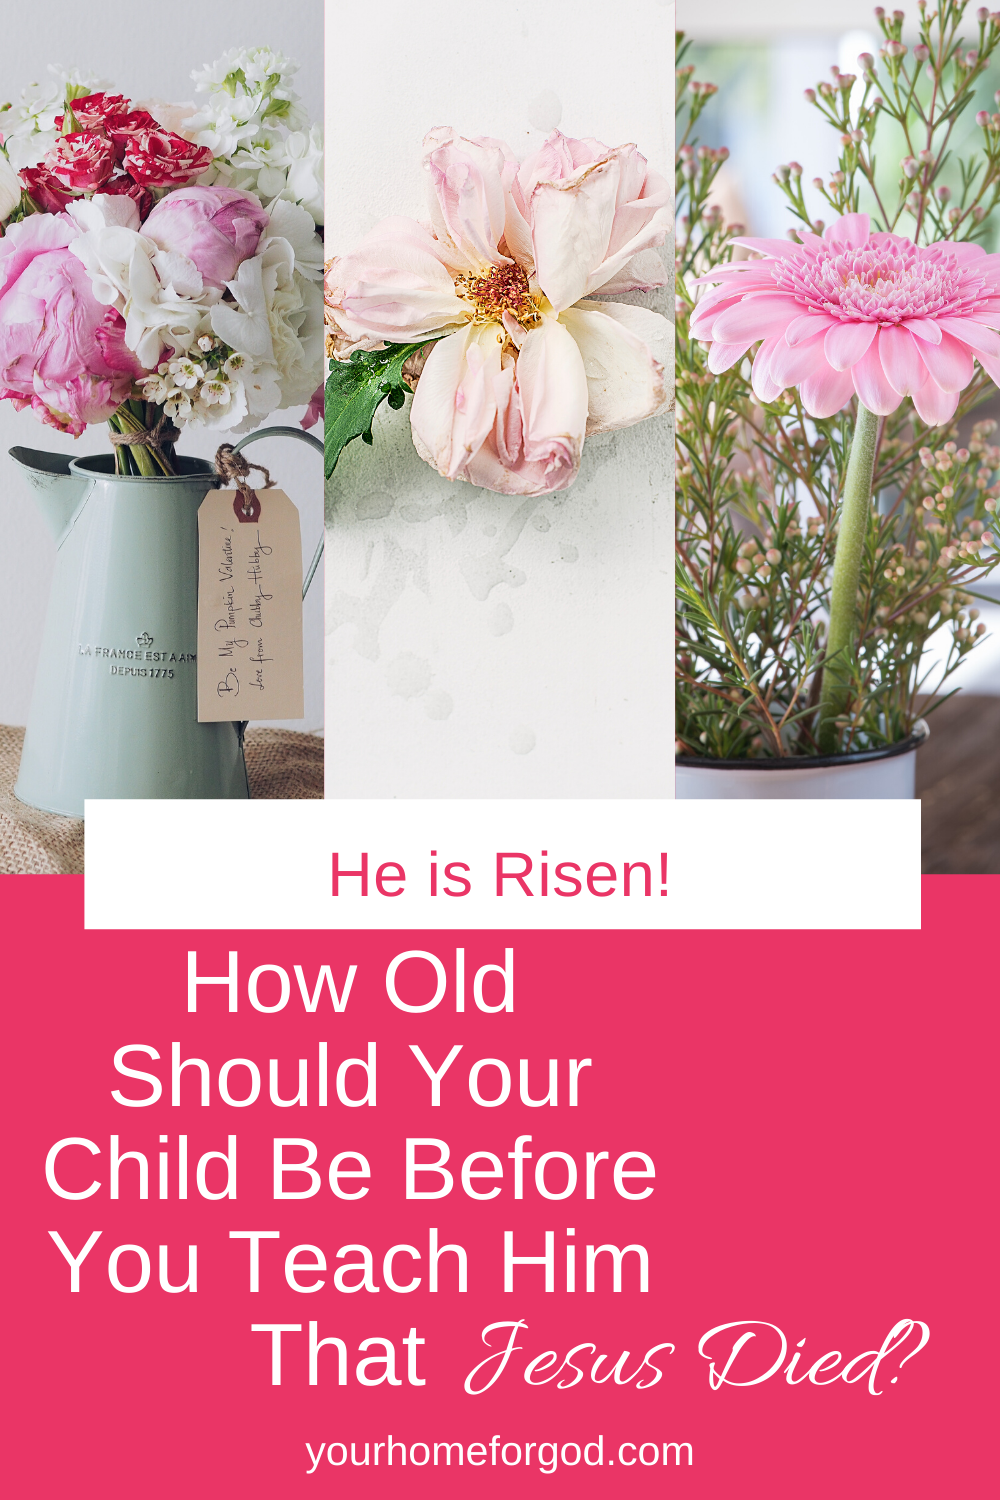 Consistency in Christian Parenting Teaching Your Kids About Jesus Death and Resurrection | Your Home For God